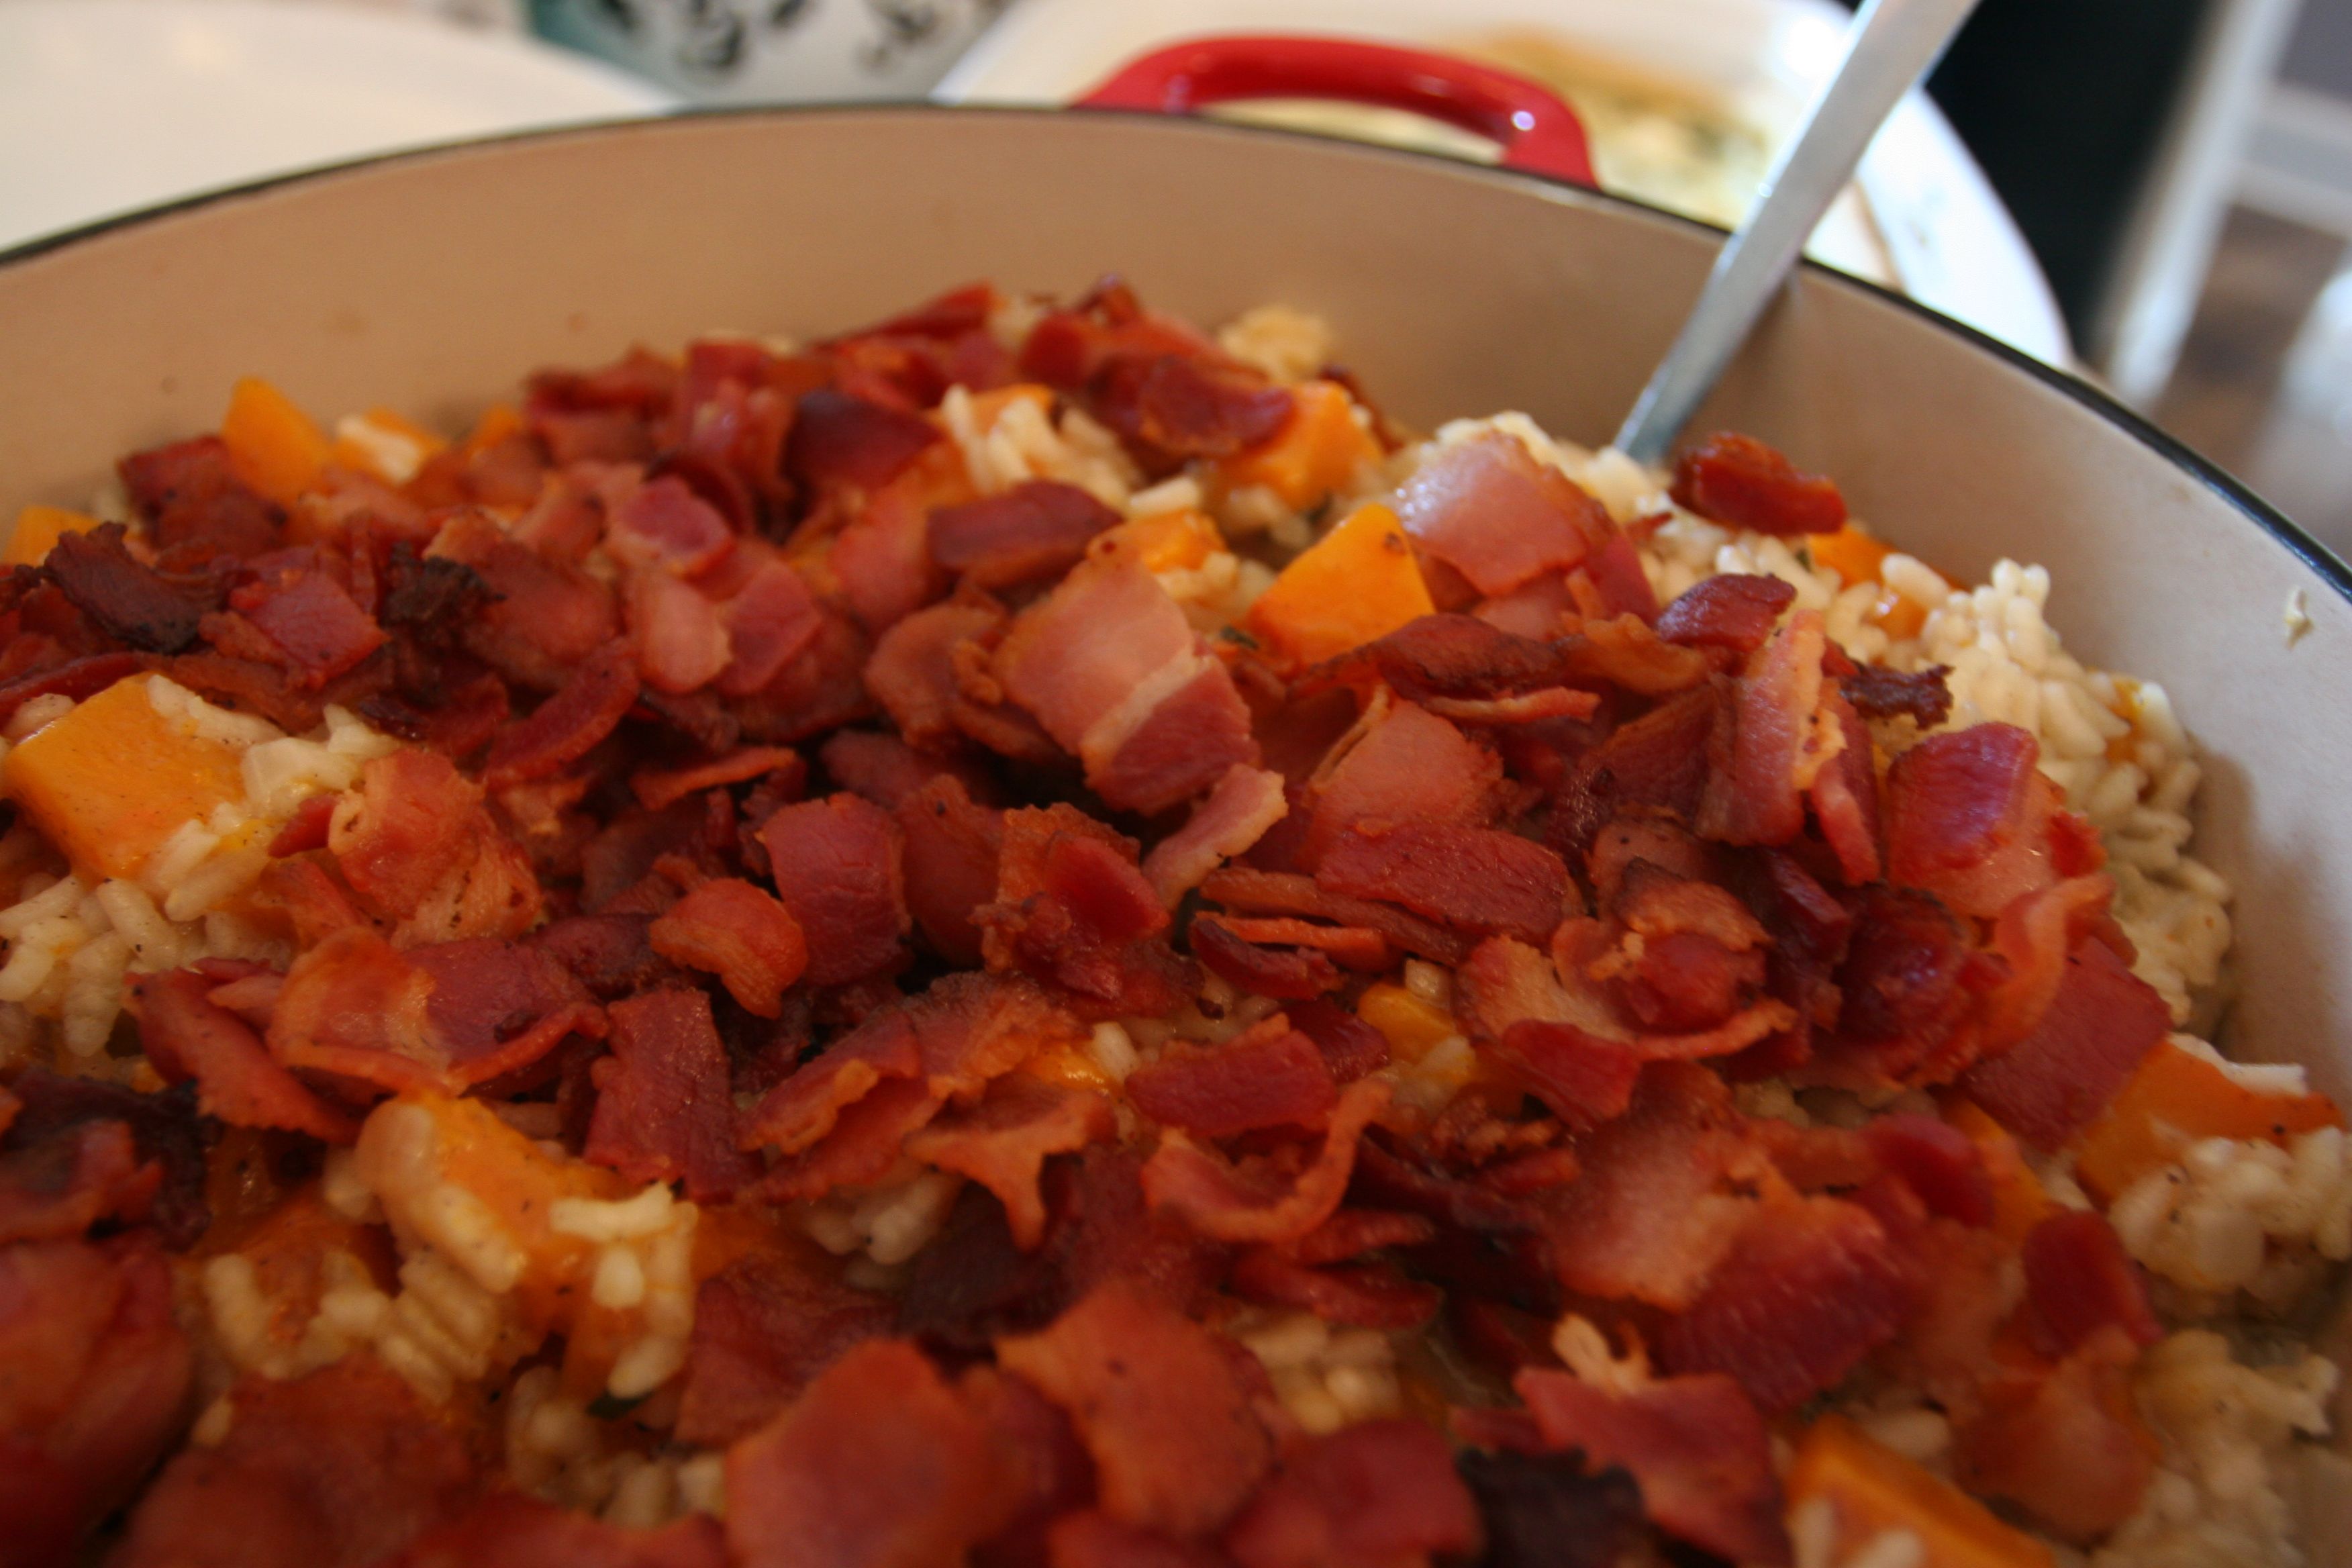 Bacon on the squash risotto.